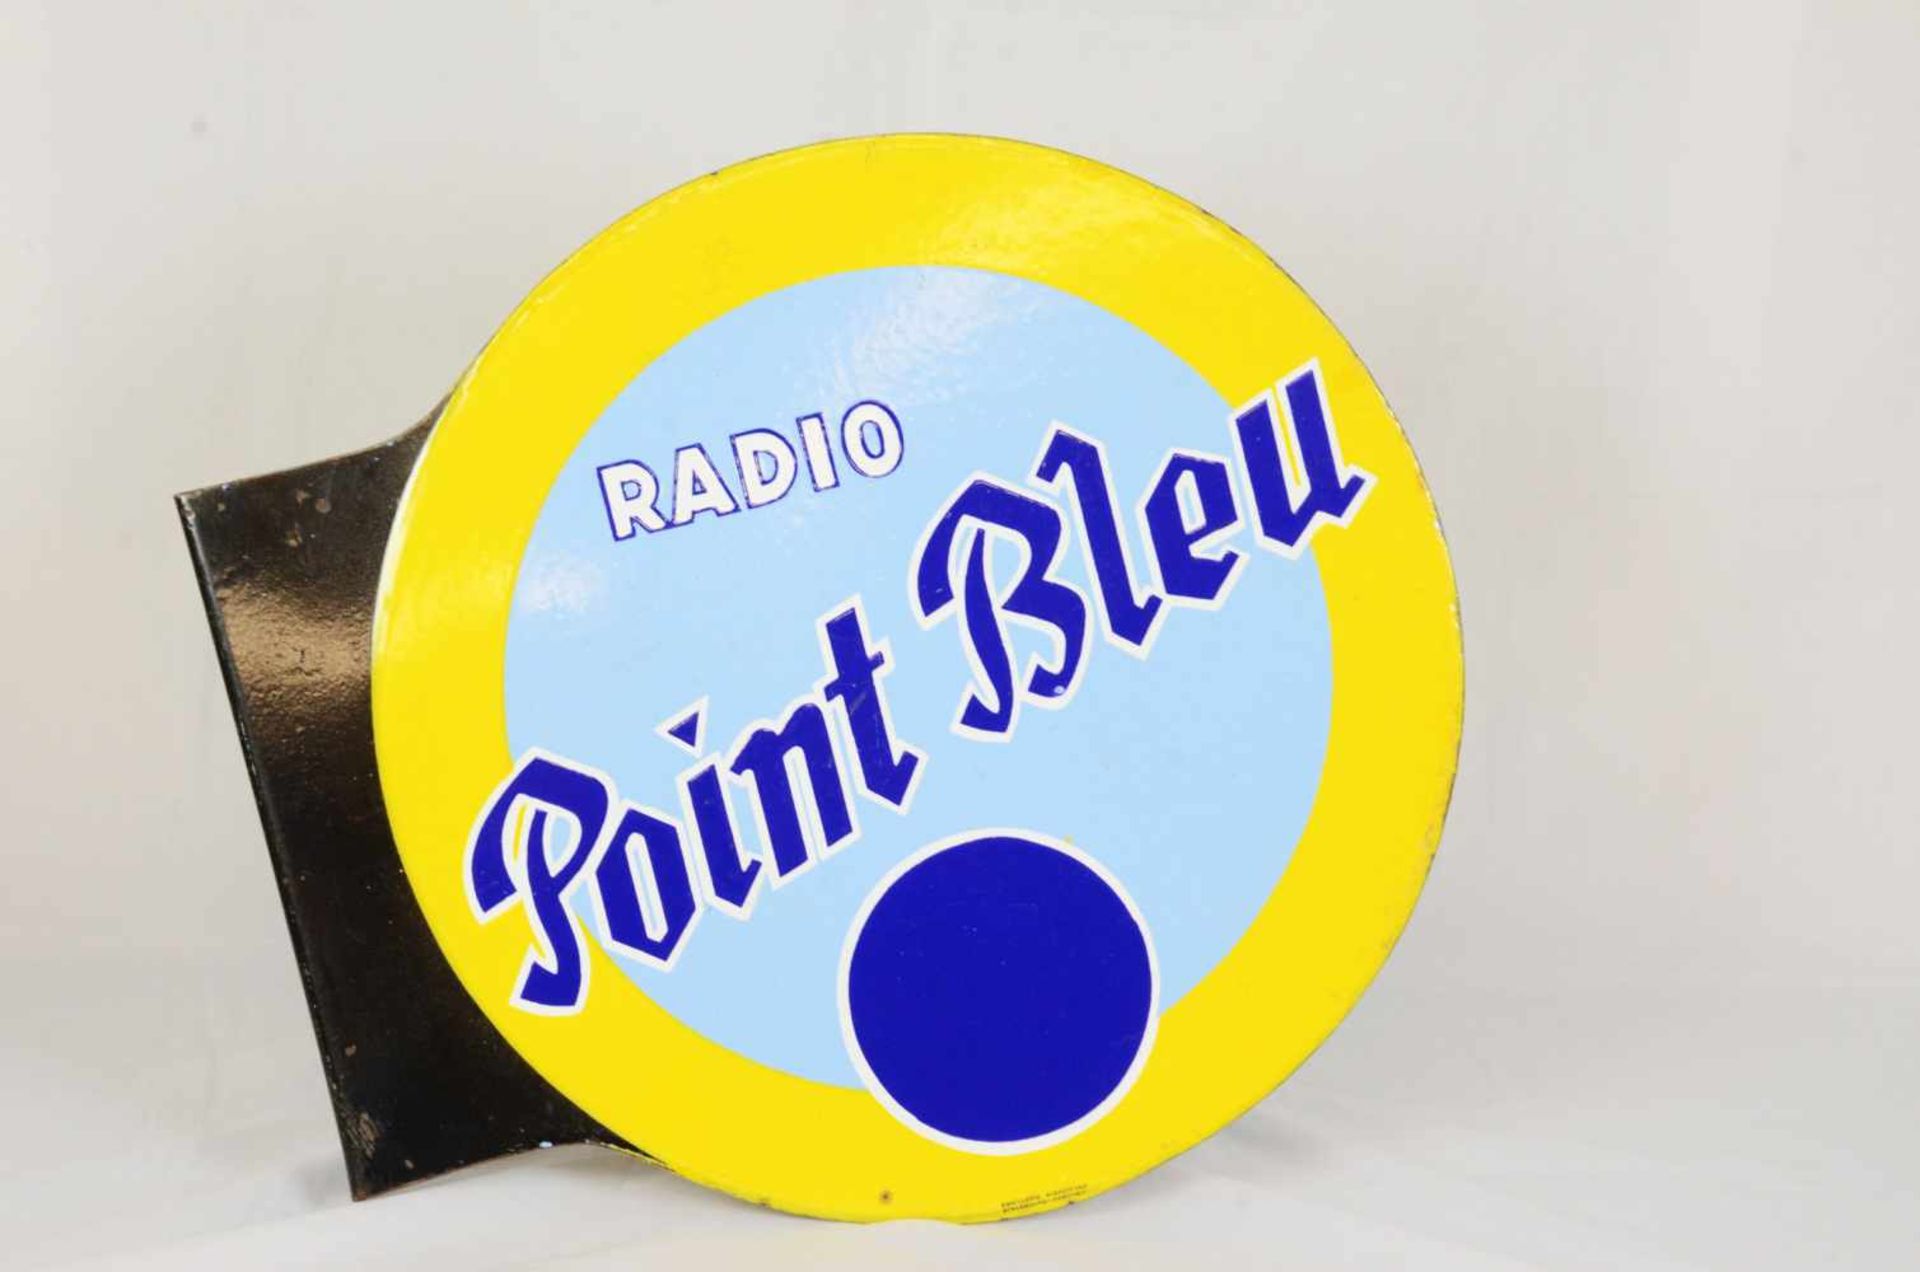 Two-sided enamel sign Radio Point BleuThis two-sided enamel sign Radio Point Bleu has a side